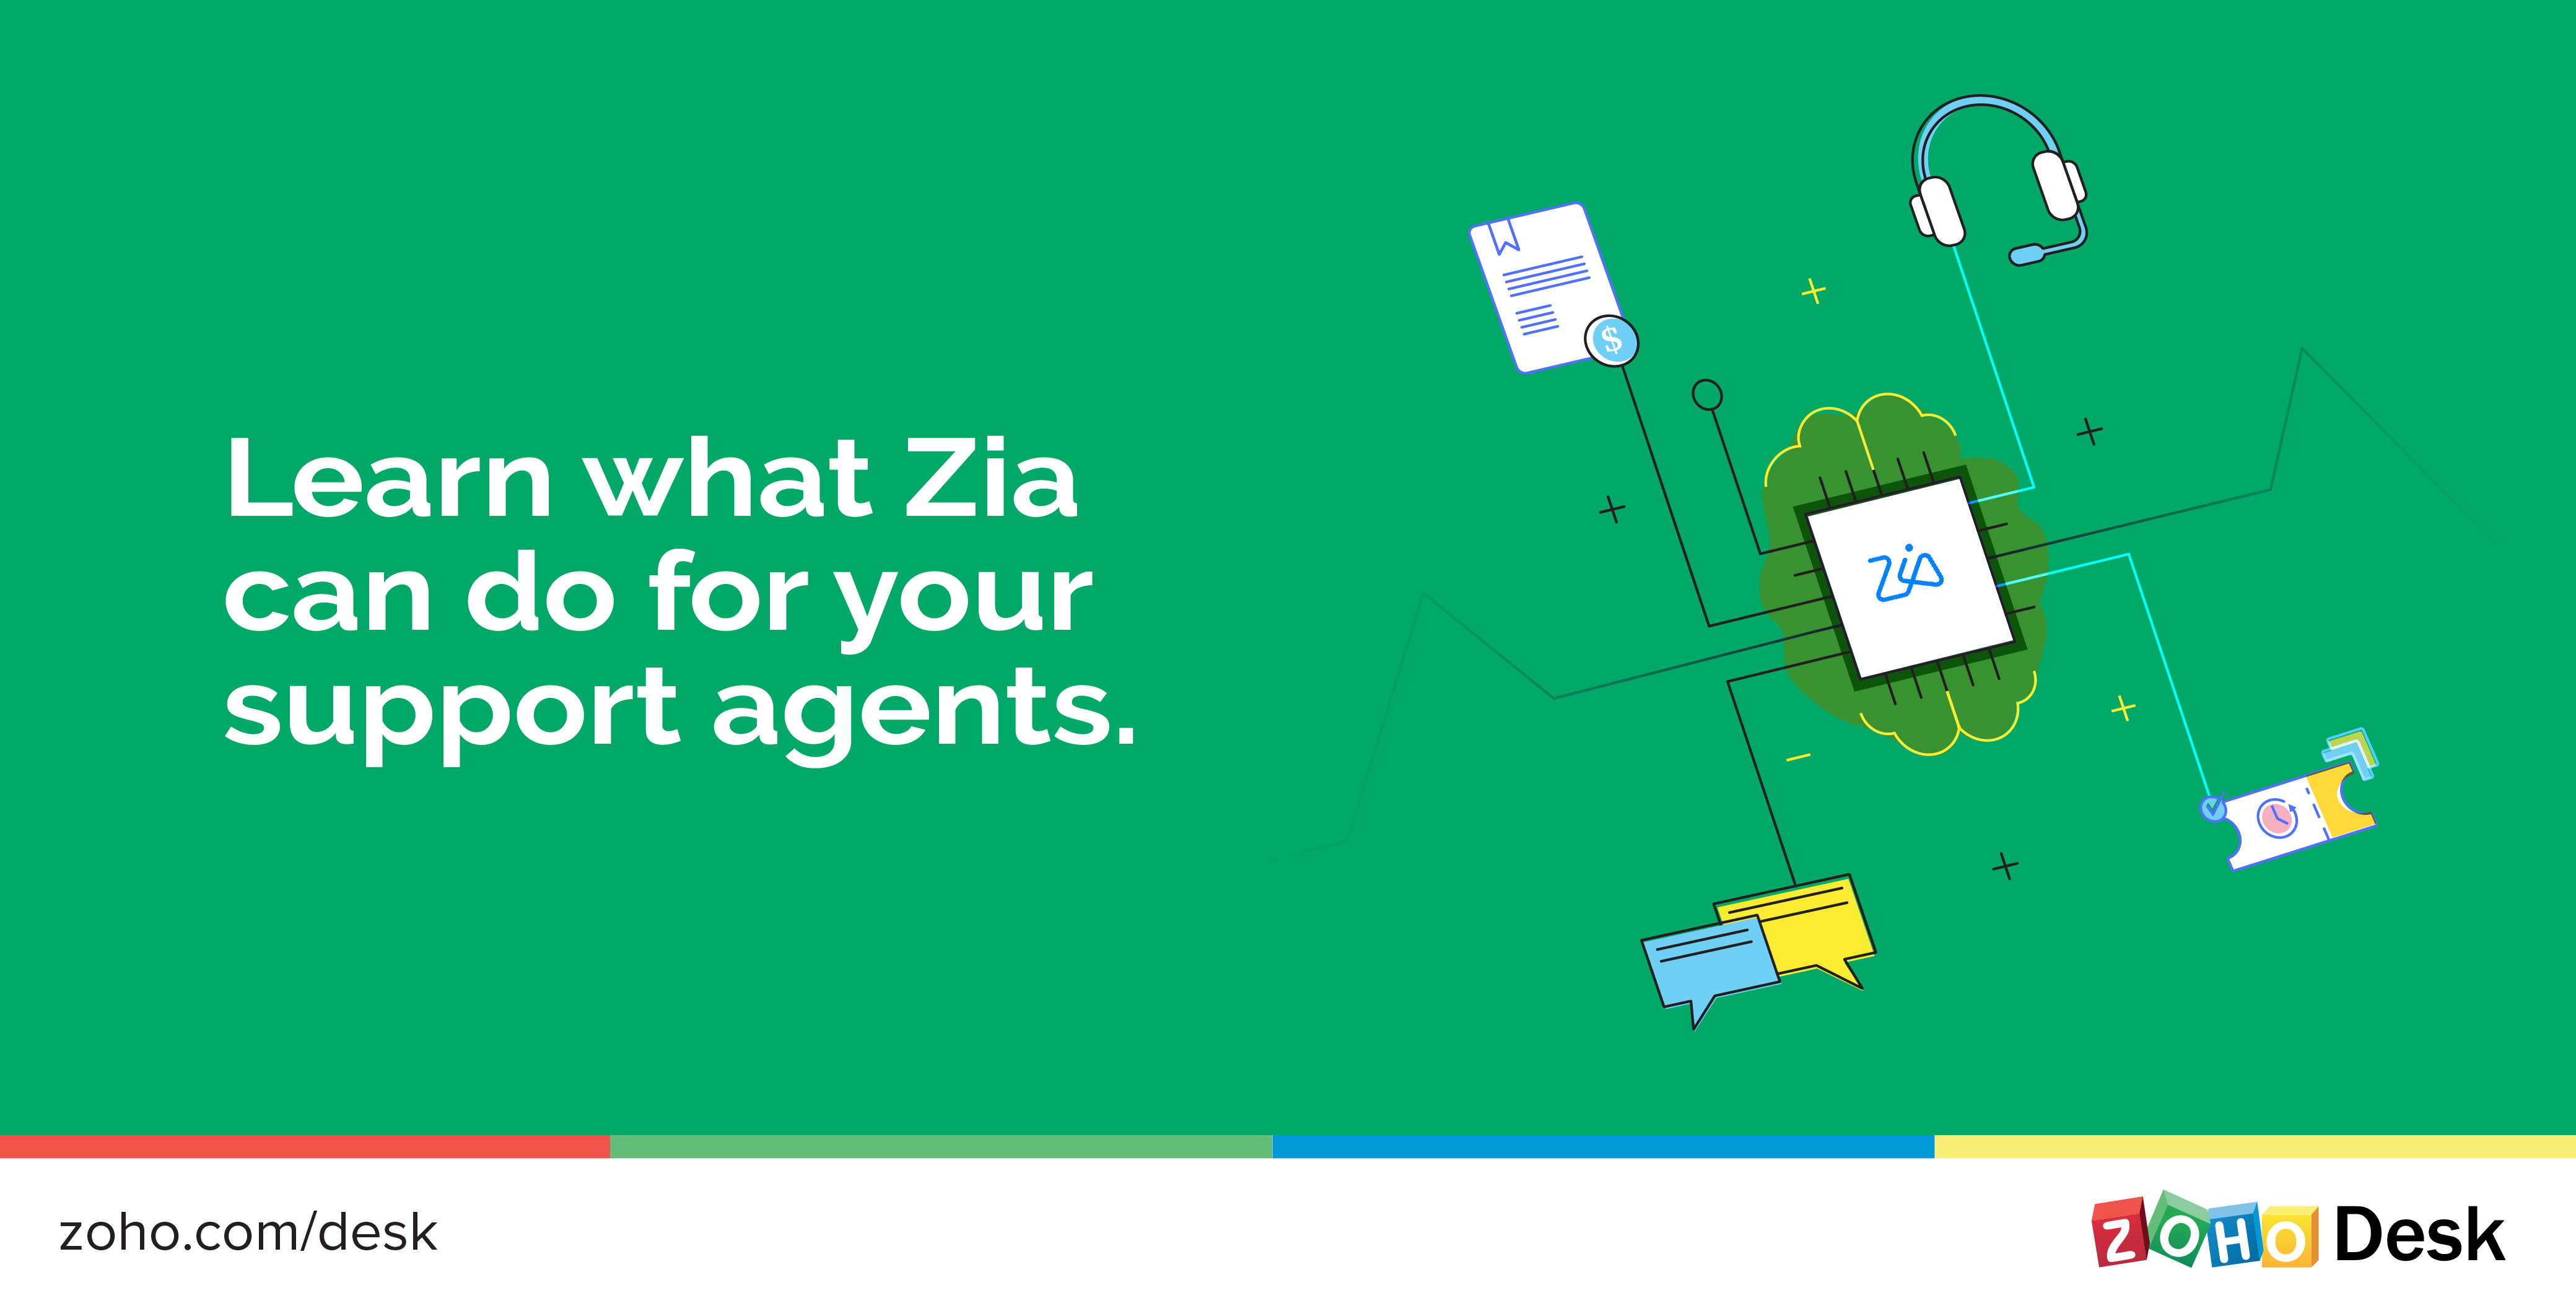 Zia for support agents